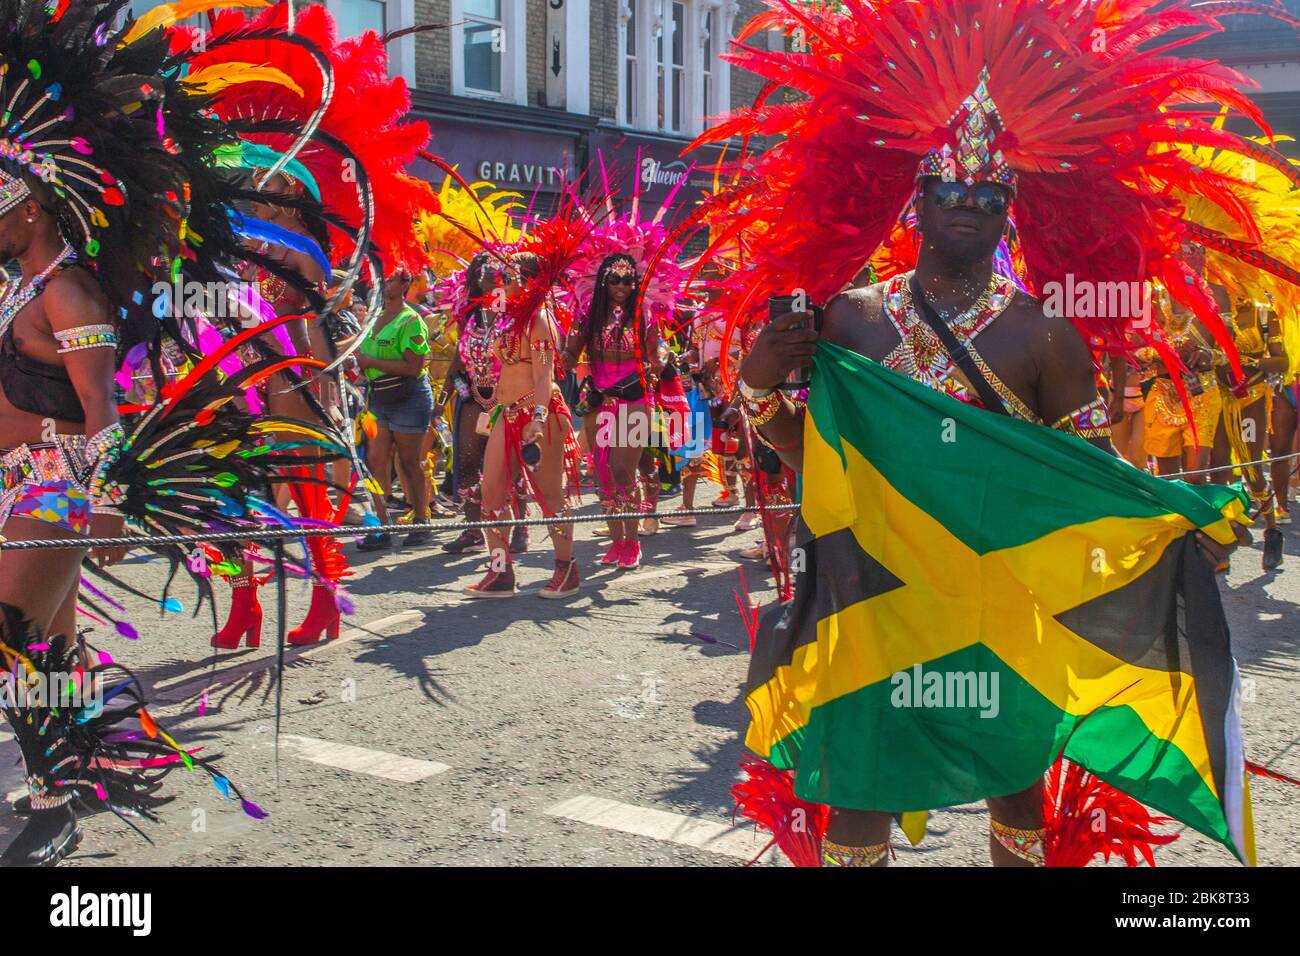 London / United Kingdom - August 26th 2019: Man in a samba outfit dancing with a Jamaican flag at the 53rd edition of Notting Hill Carnival 2019 Stock Photo